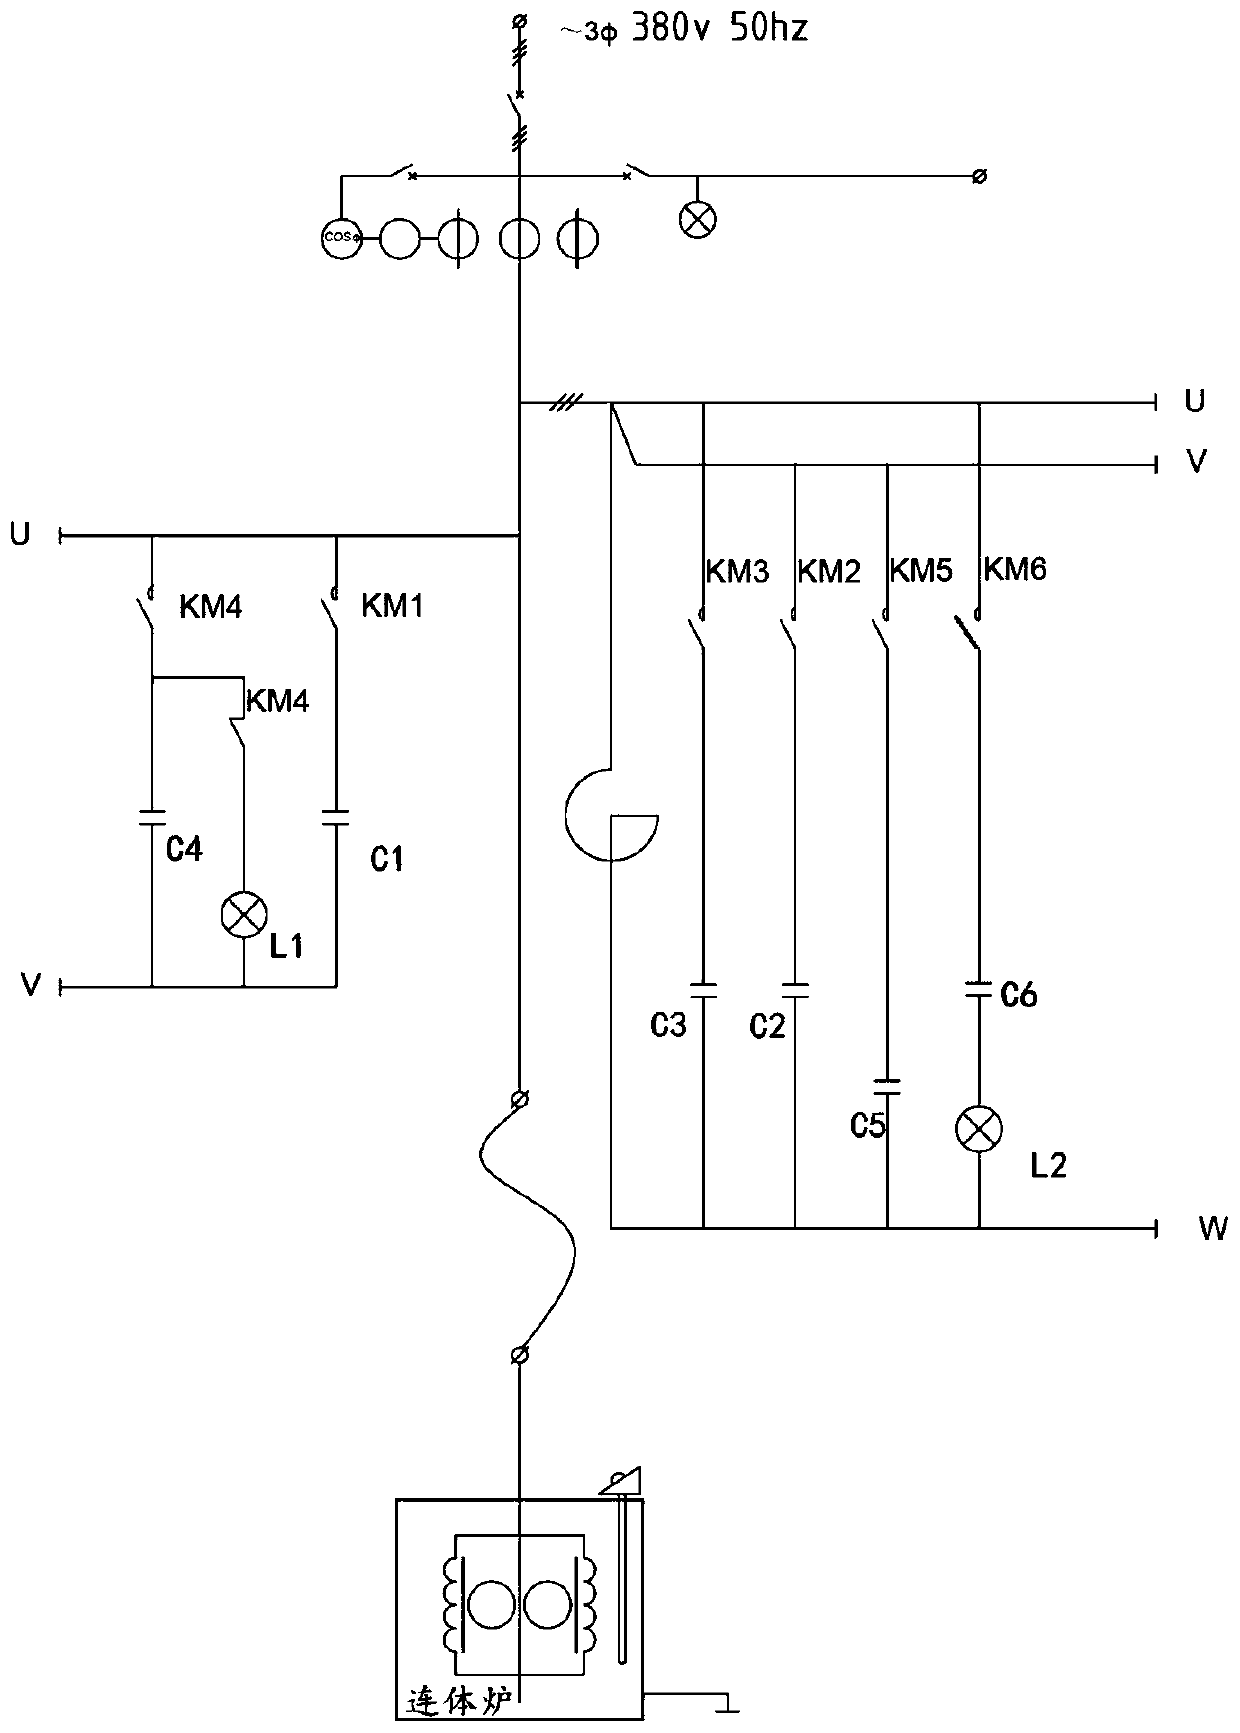 Power factor compensation device for connected furnaces